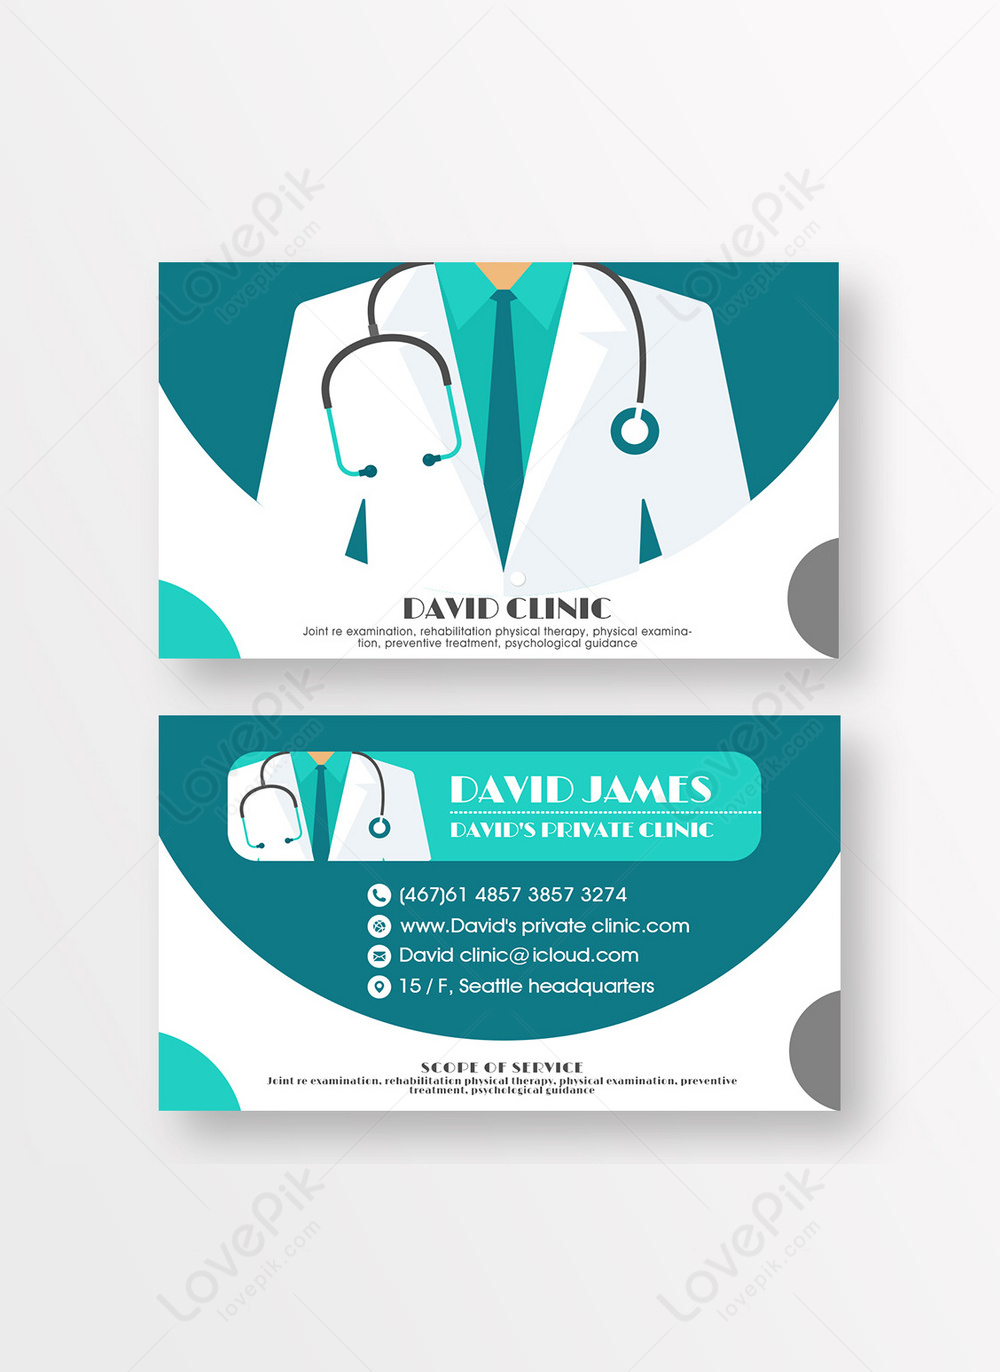 Medical themed business card design template image_picture free With Medical Business Cards Templates Free